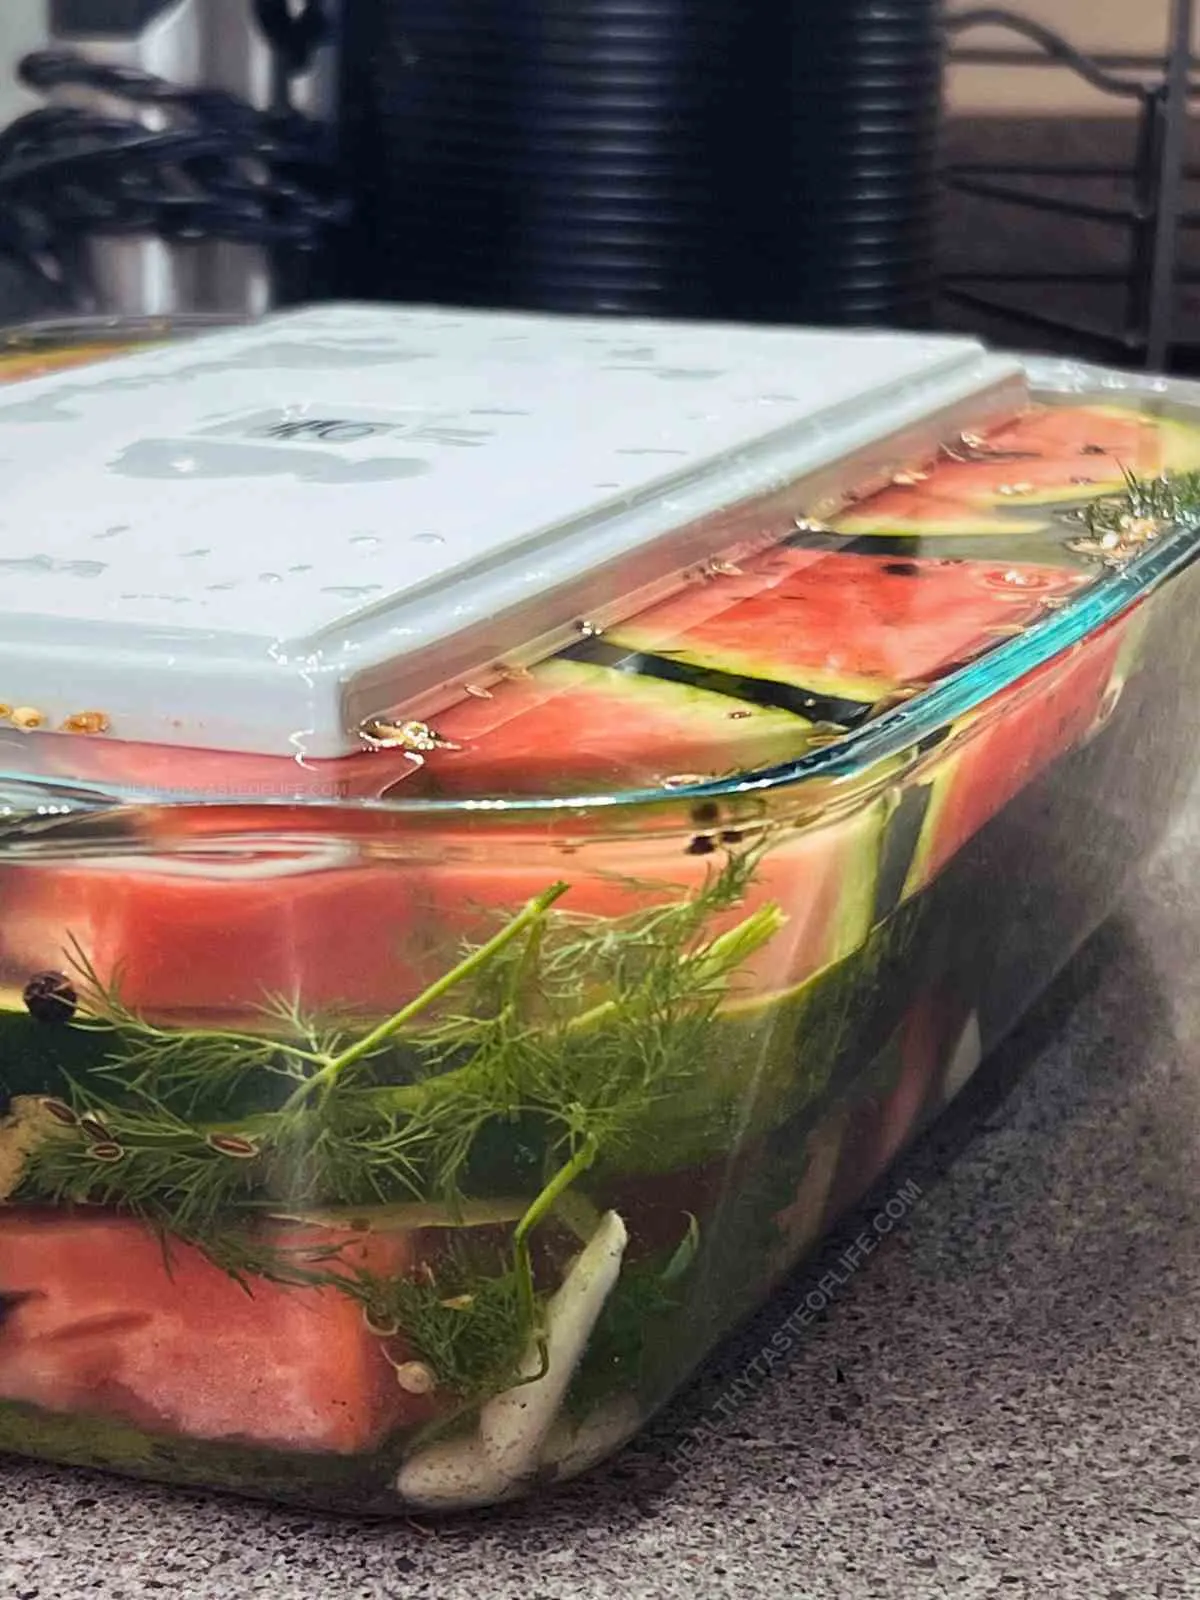 Picture showing how the watermelon is submerged in the brine with a platter on top as weight.